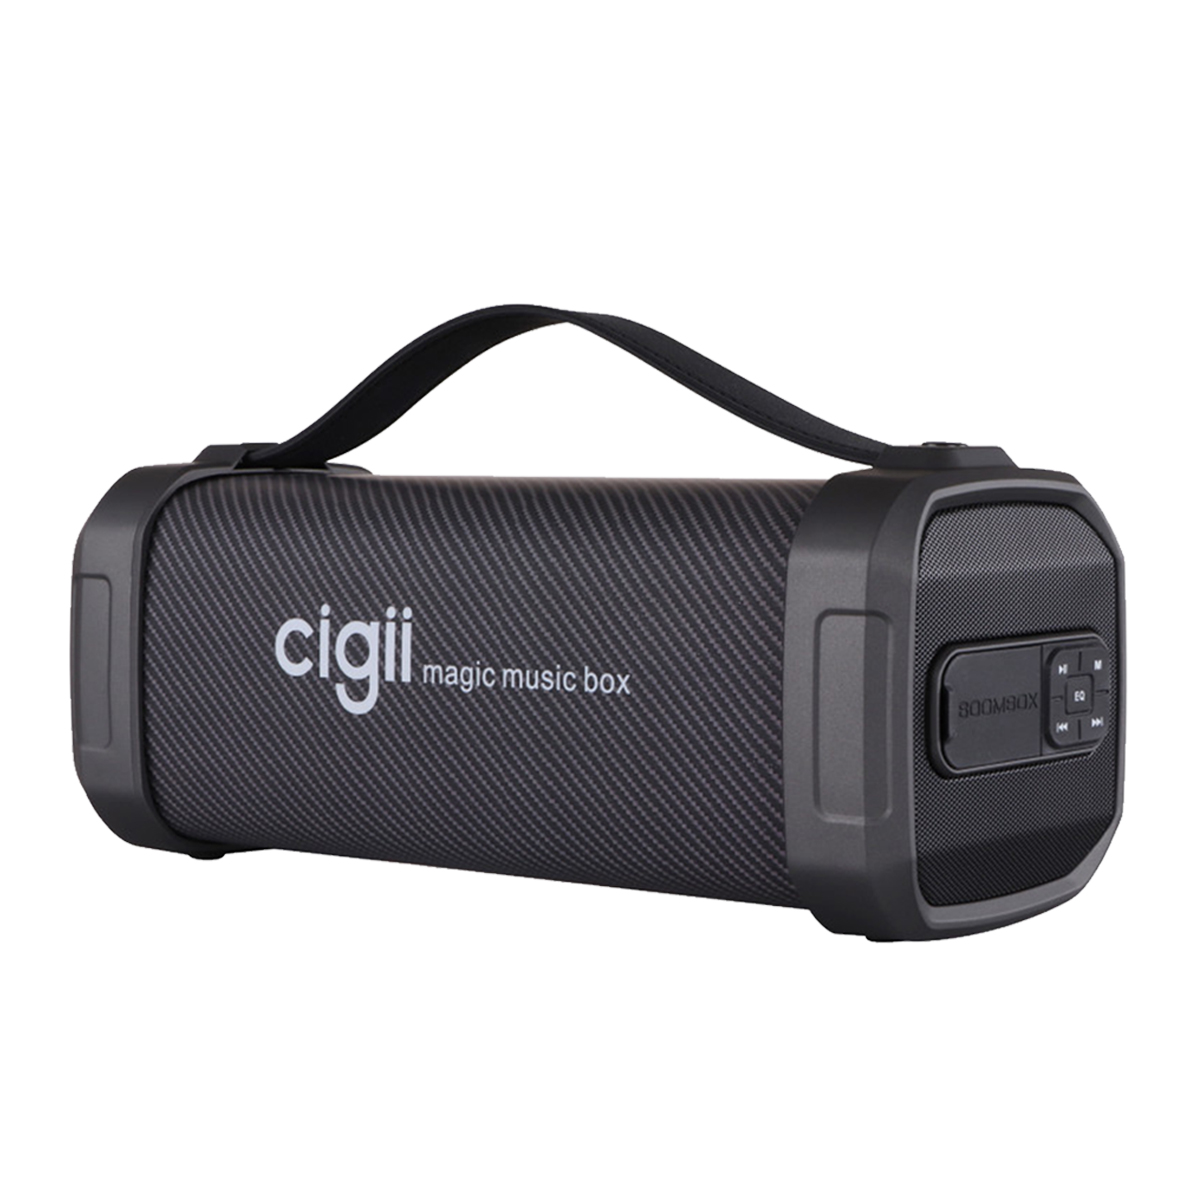 

CIGII F62D 10W Portable bluetooth Speaker Noise Reduction Outdoor Headset Support FM Radio USB AUX With Strap A2DP Wirel